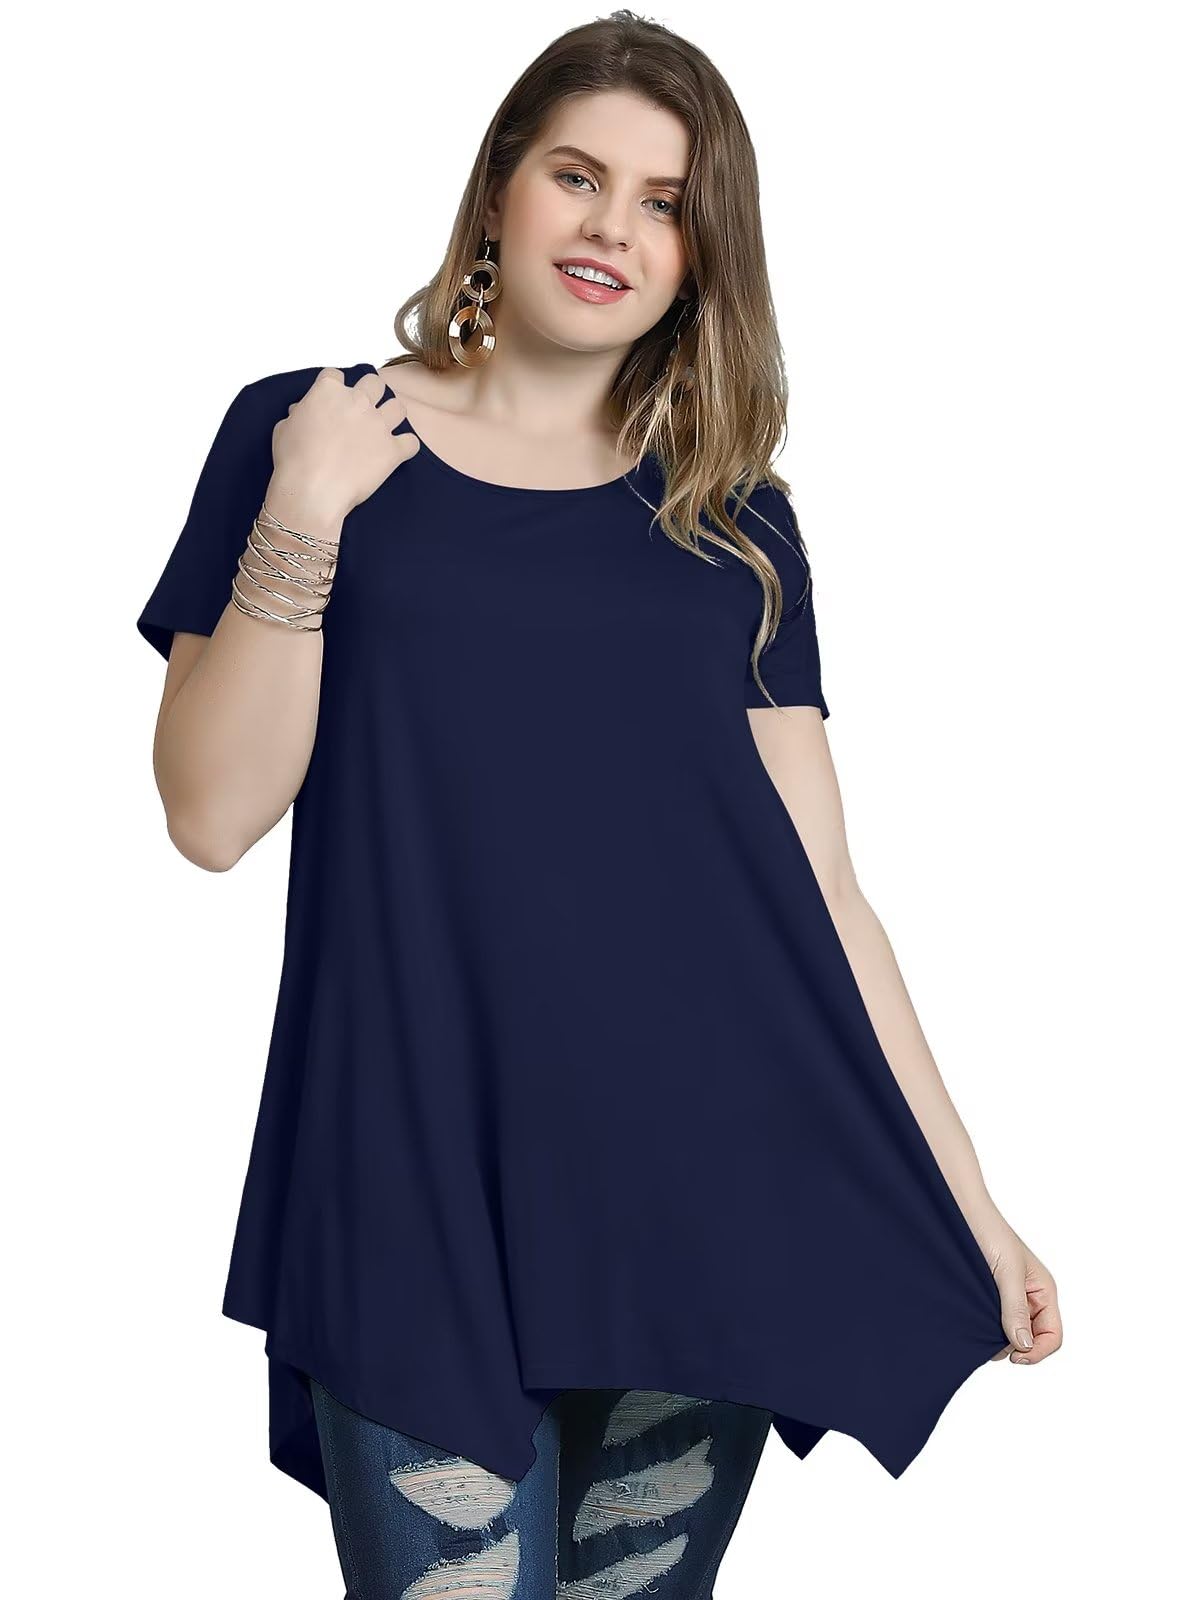 LARACE Short Sleeve Shirts for Womens Plus Size Tops Casual Summer Clothes Asymmetrical Tunic Blouses